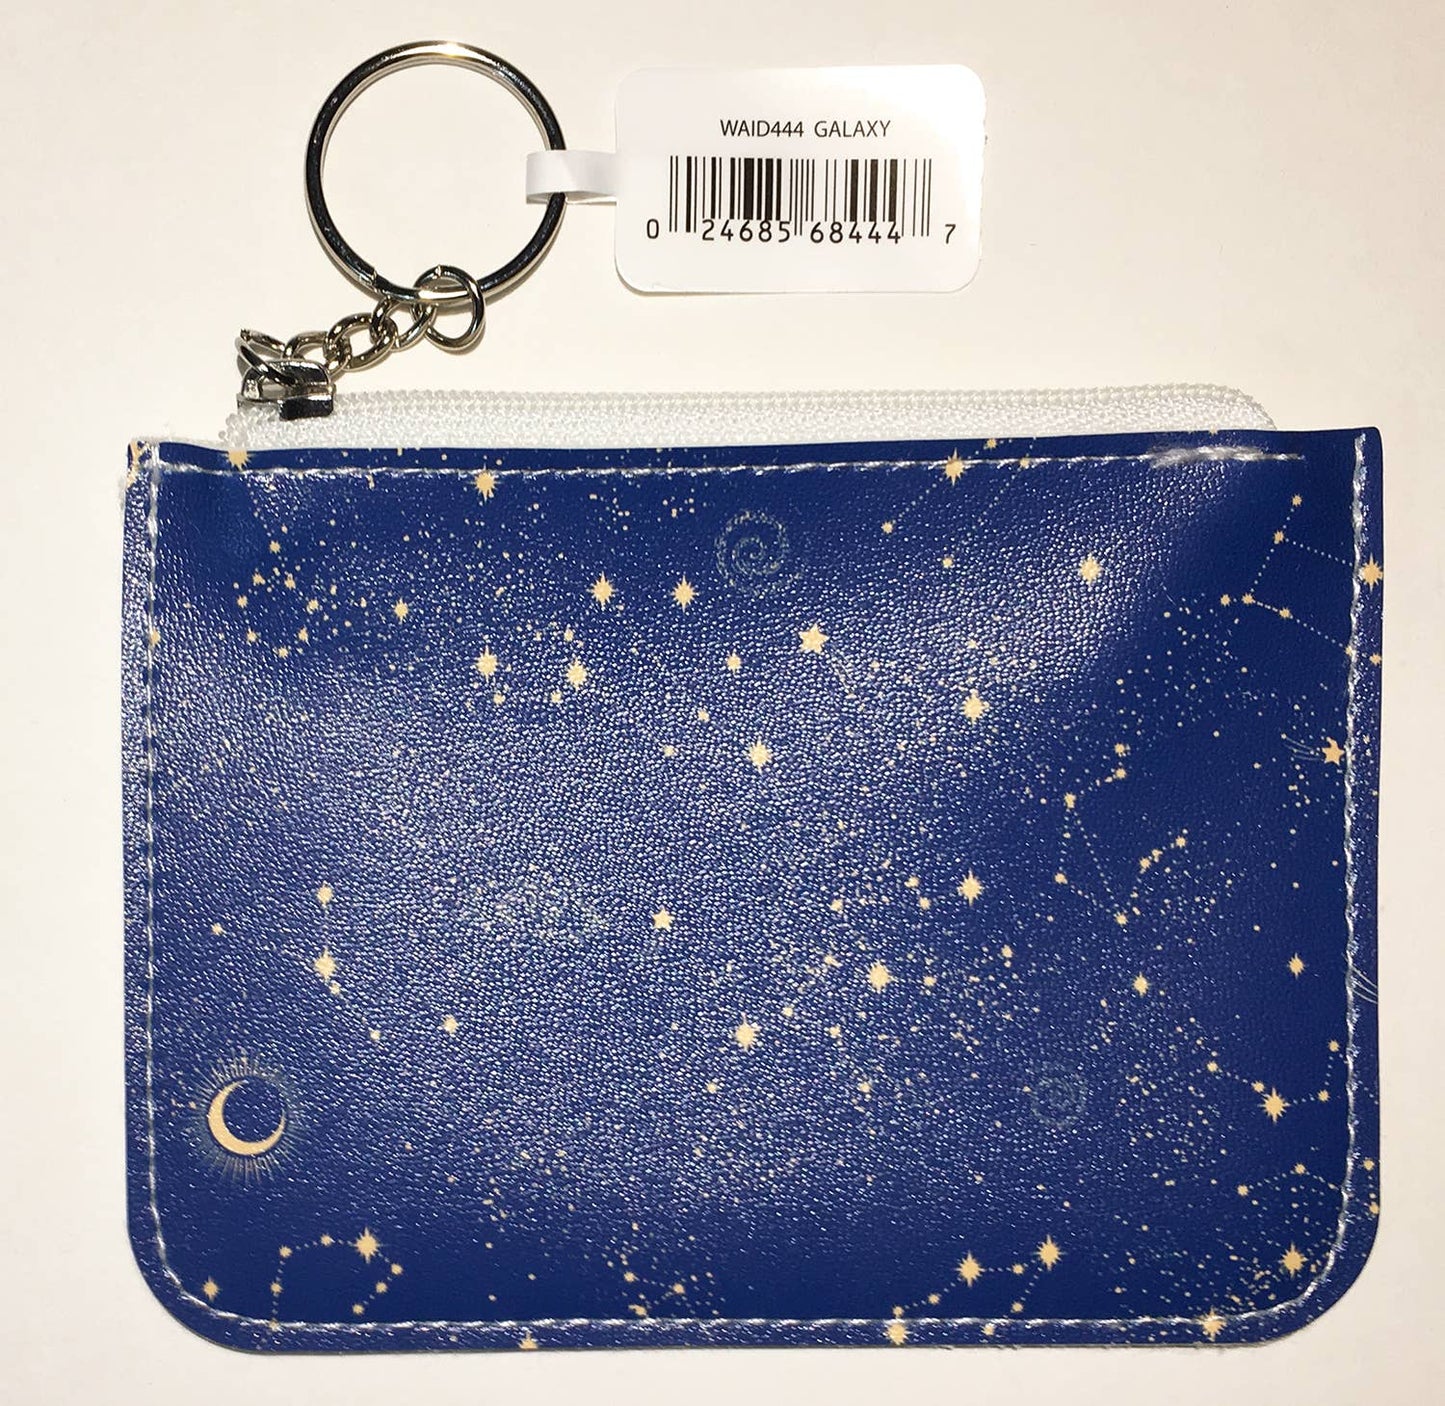 Galaxy Wallet with ID holder and keychain